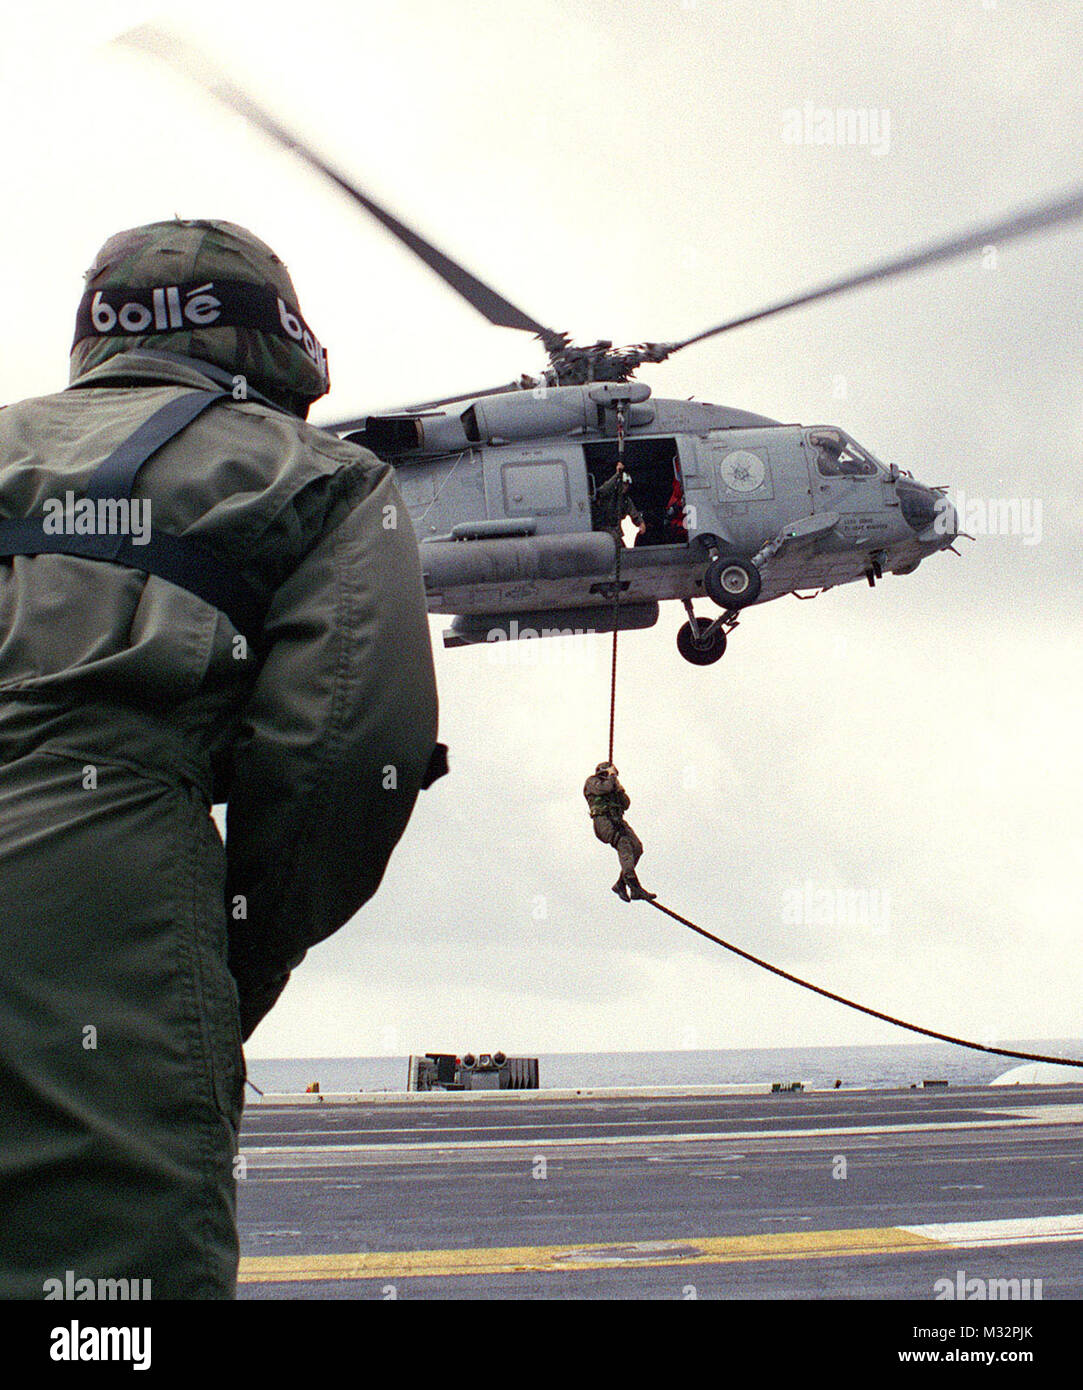 970913-N-6939M-140 ABOARD USS NIMITZ (Sept. 11, 1997) -- Marines aboard the aircraft carrier USS Nimitz (CVN 68) stand ready to recieve a fellow Marine during a 'fast rope' training exercise during World cruise 97'-98'.   U.S. Navy photo by Photographer's Mate 3rd Class Christopher Mobley.  (RELEASED) 970913-N-6939M-140 by navalsafetycenter Stock Photo